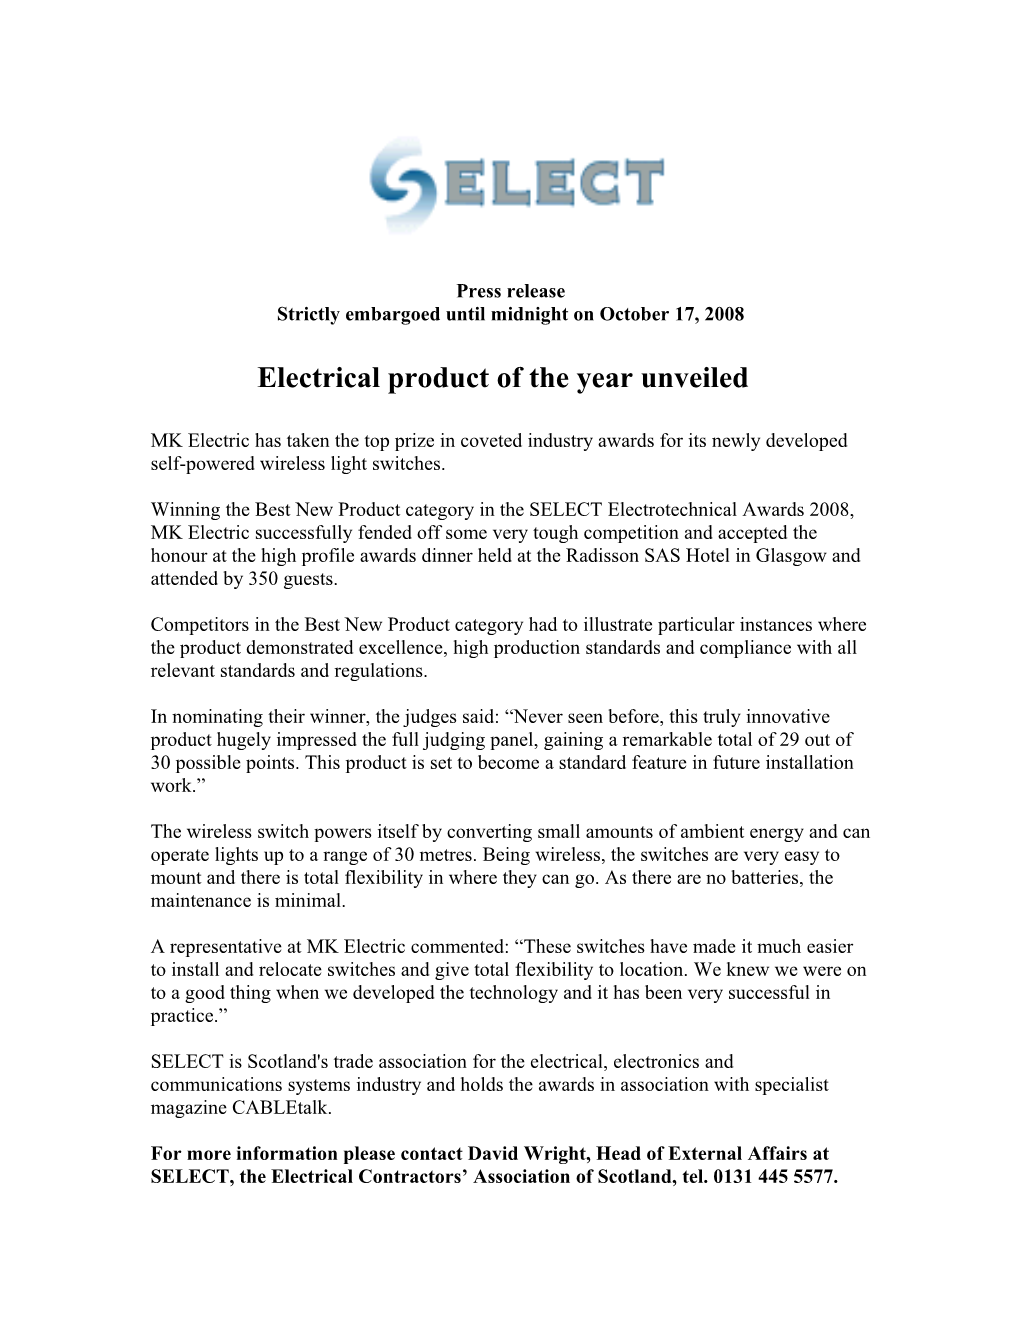 Electrical Product of the Year Unveiled